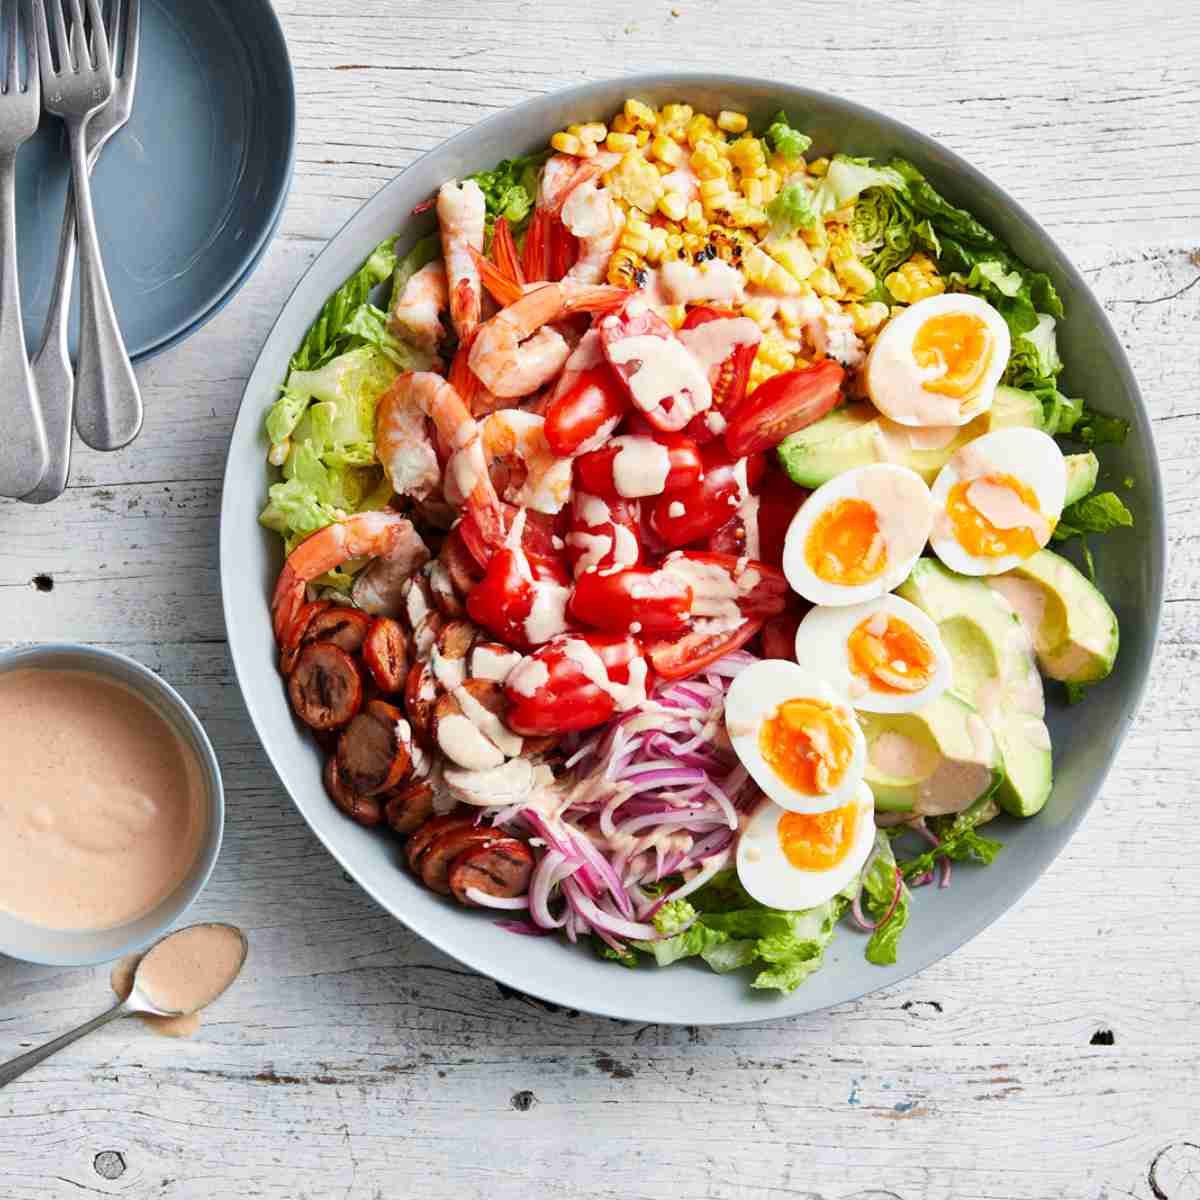 Cobb salad with boiled eggs, avovado, onions, olives, prawns and romatherapy tomatoes on a bed of lettuce.